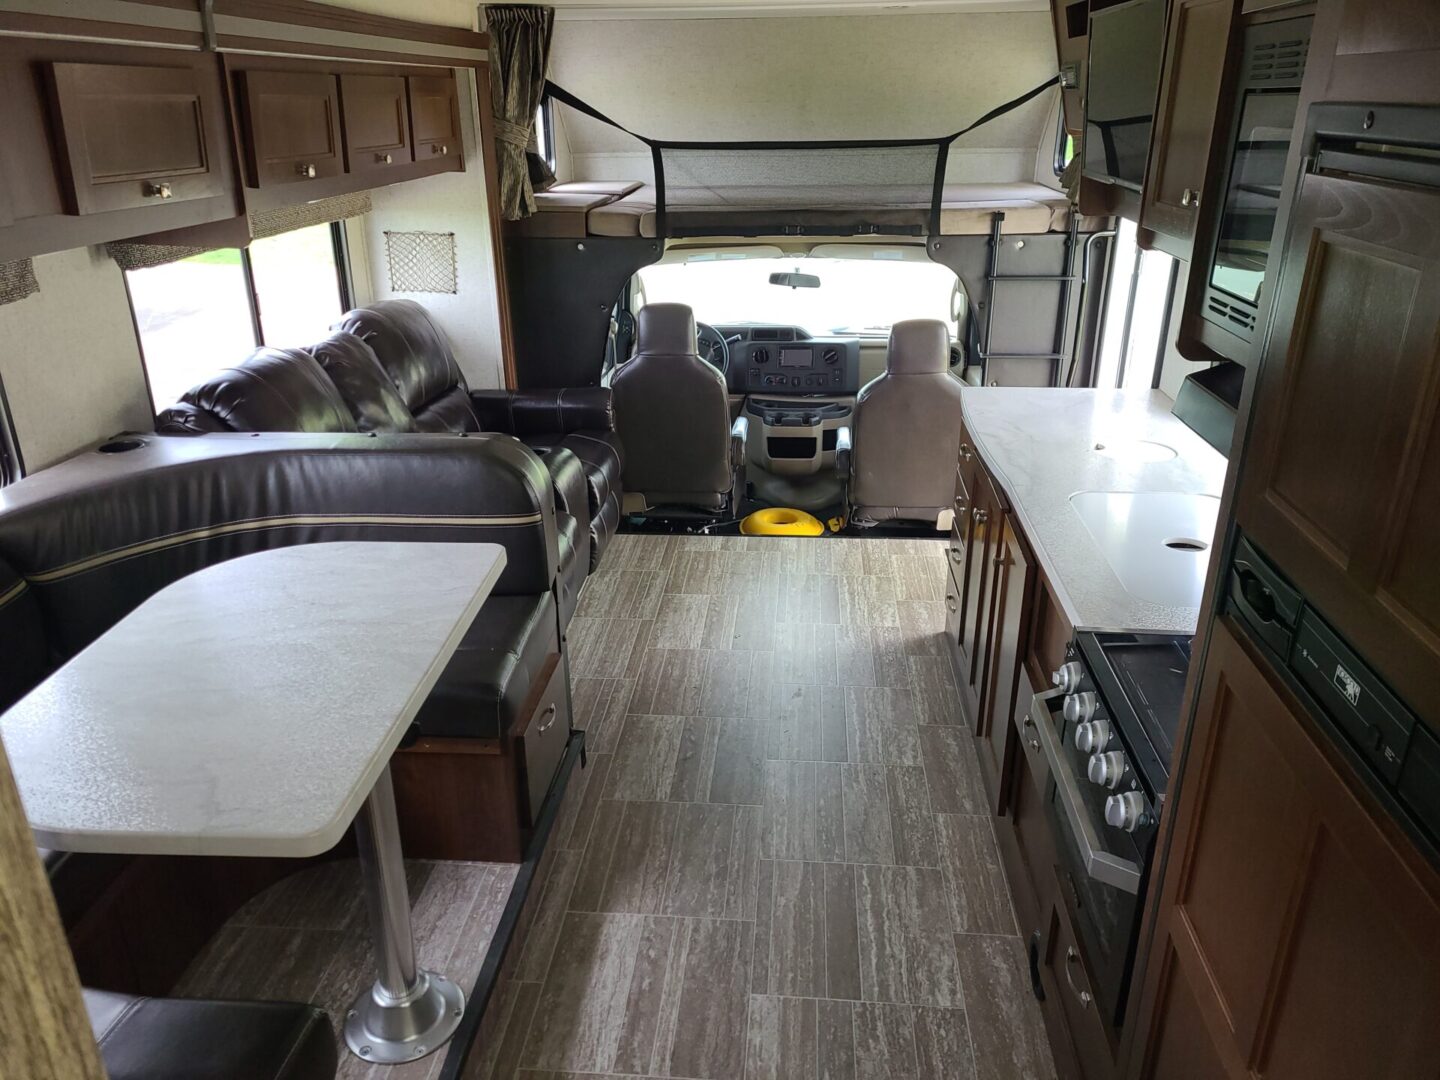 A view of the inside of a rv.